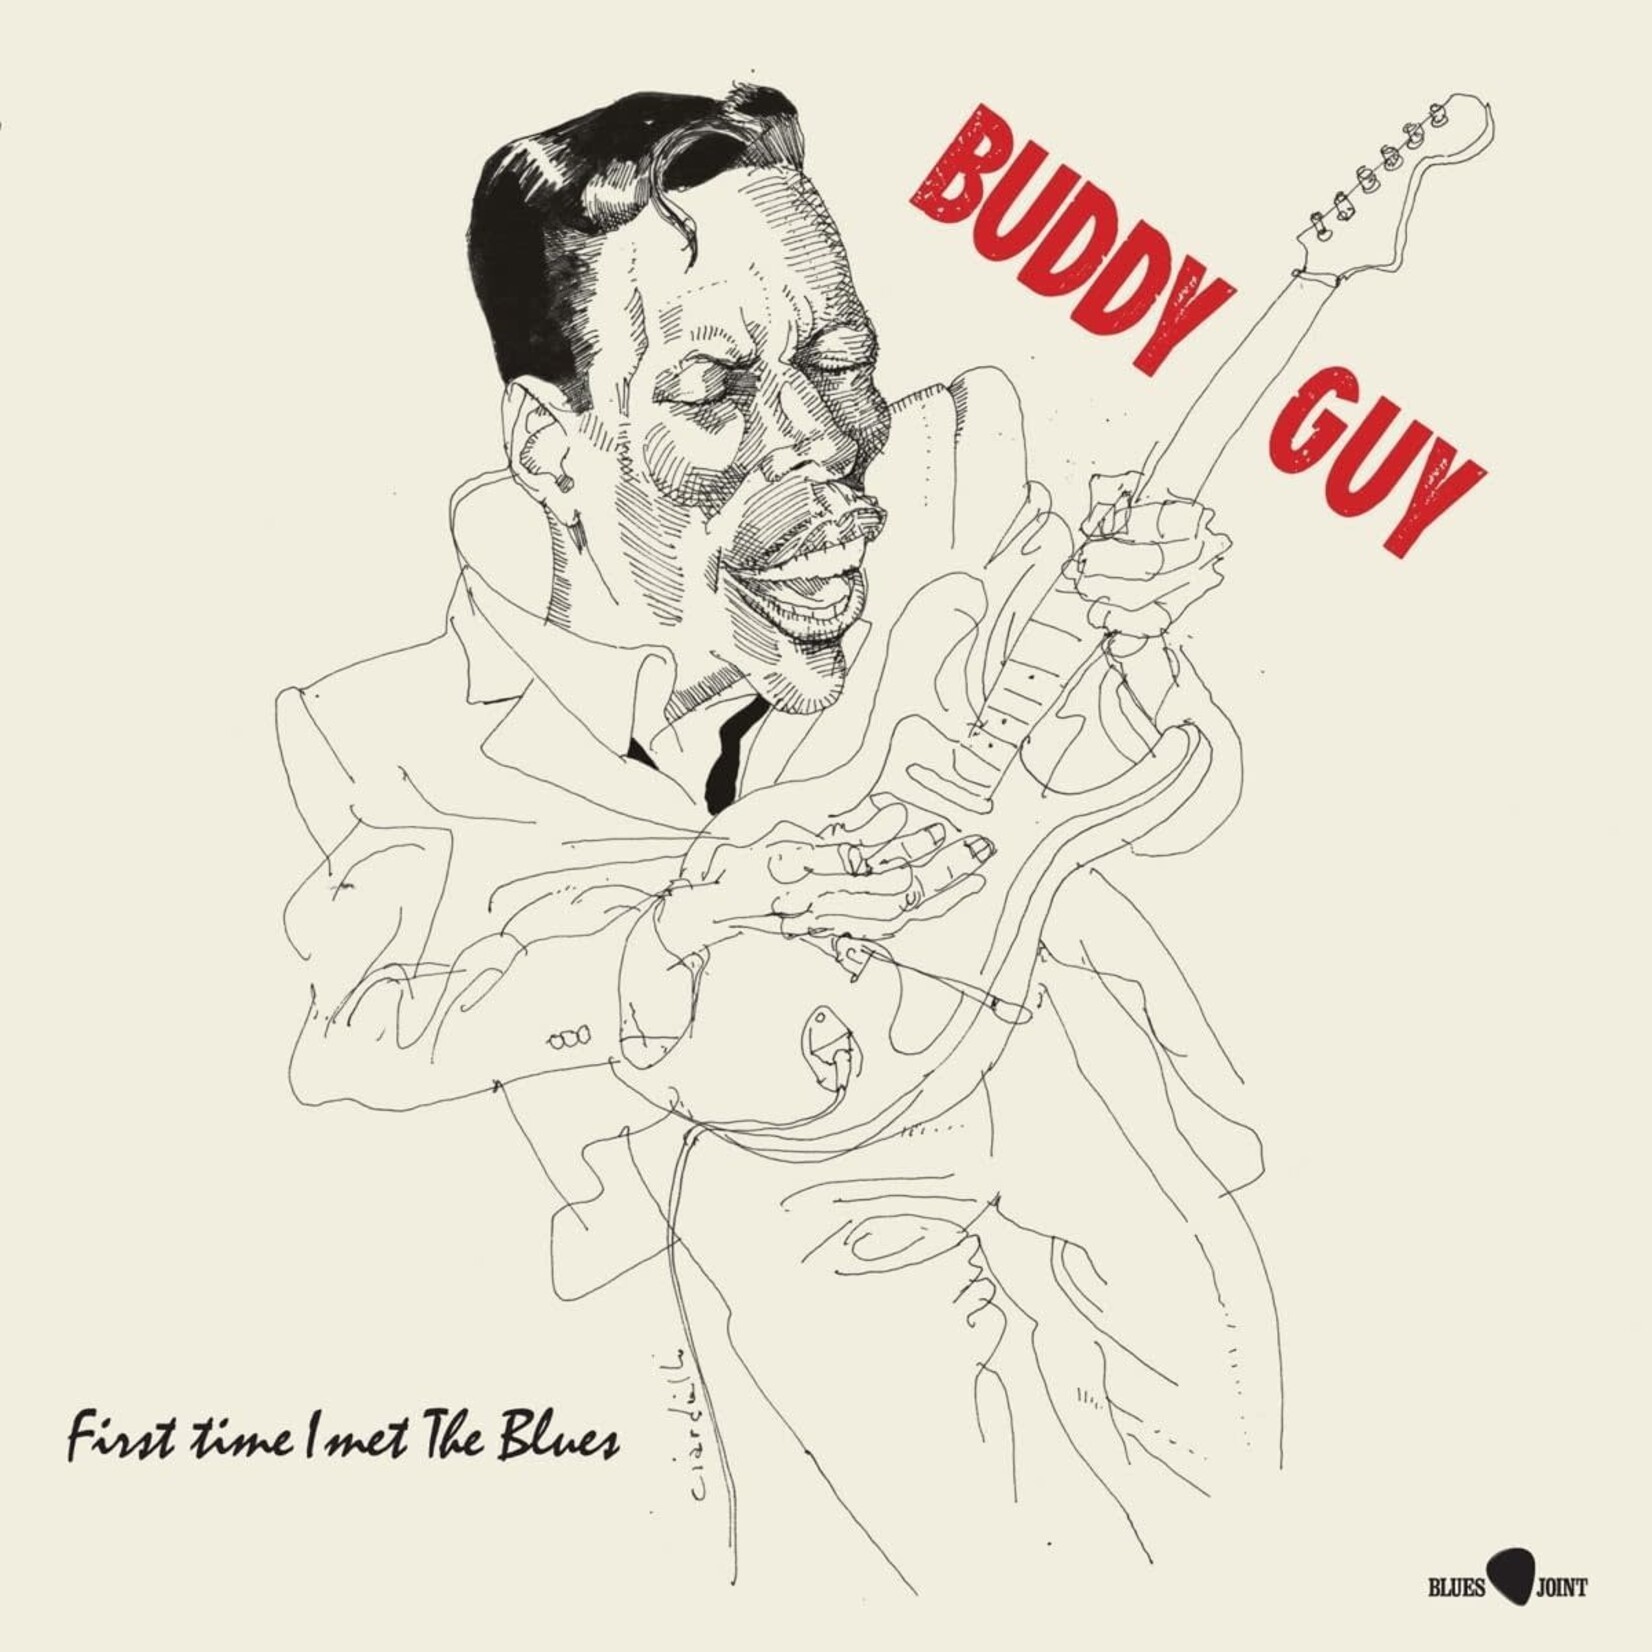 Vinyl Buddy Guy - First Time I Met The Blues